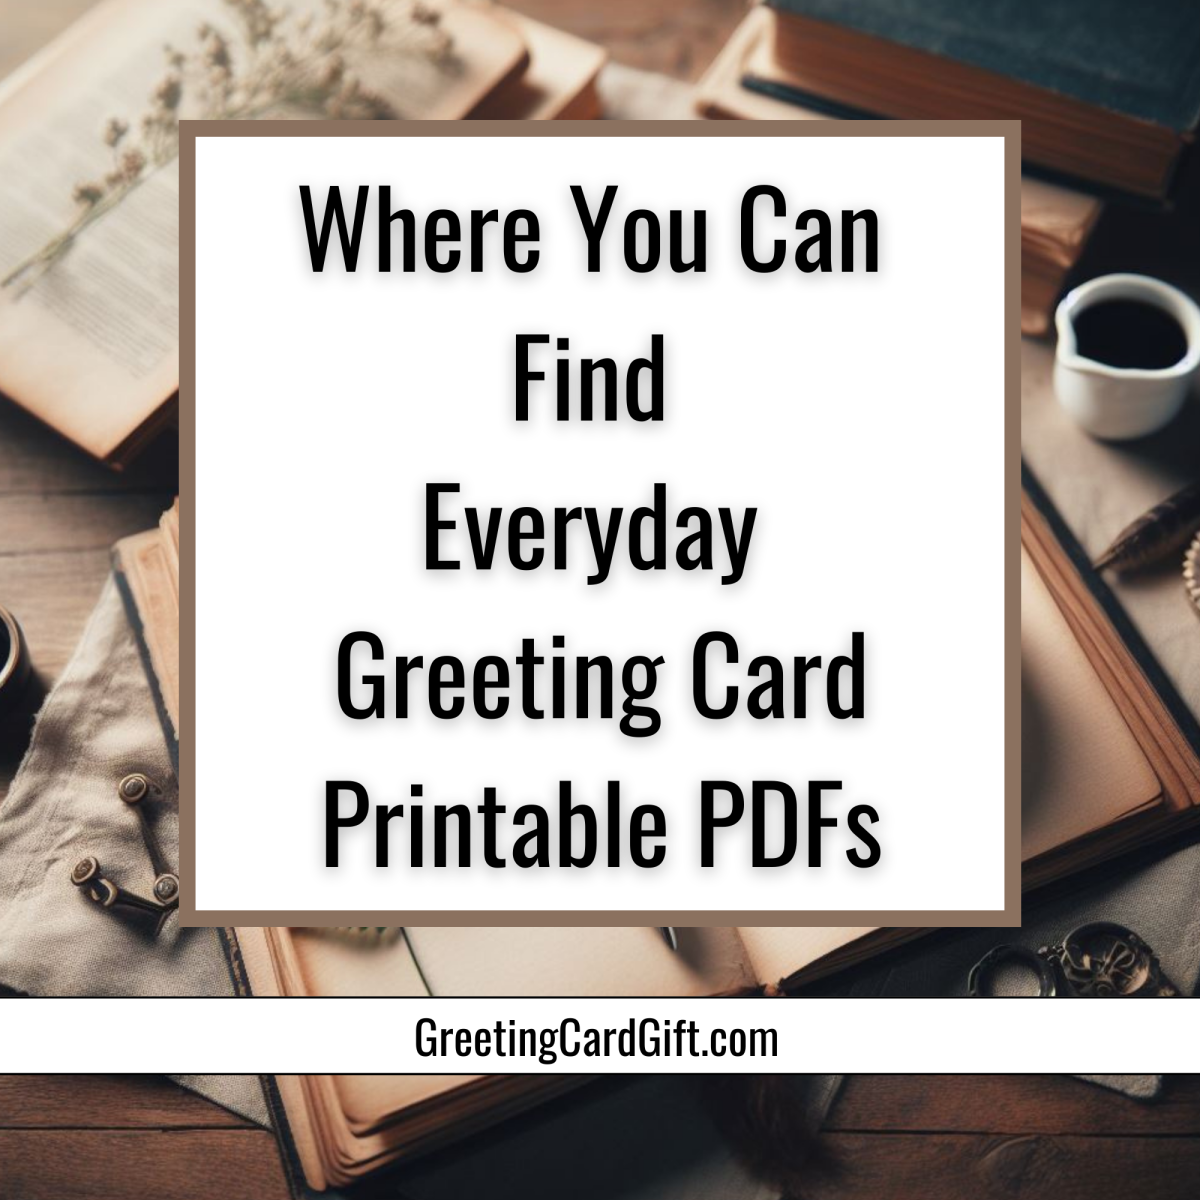 Where You Can Find Everyday Greeting Card Printable PDFs